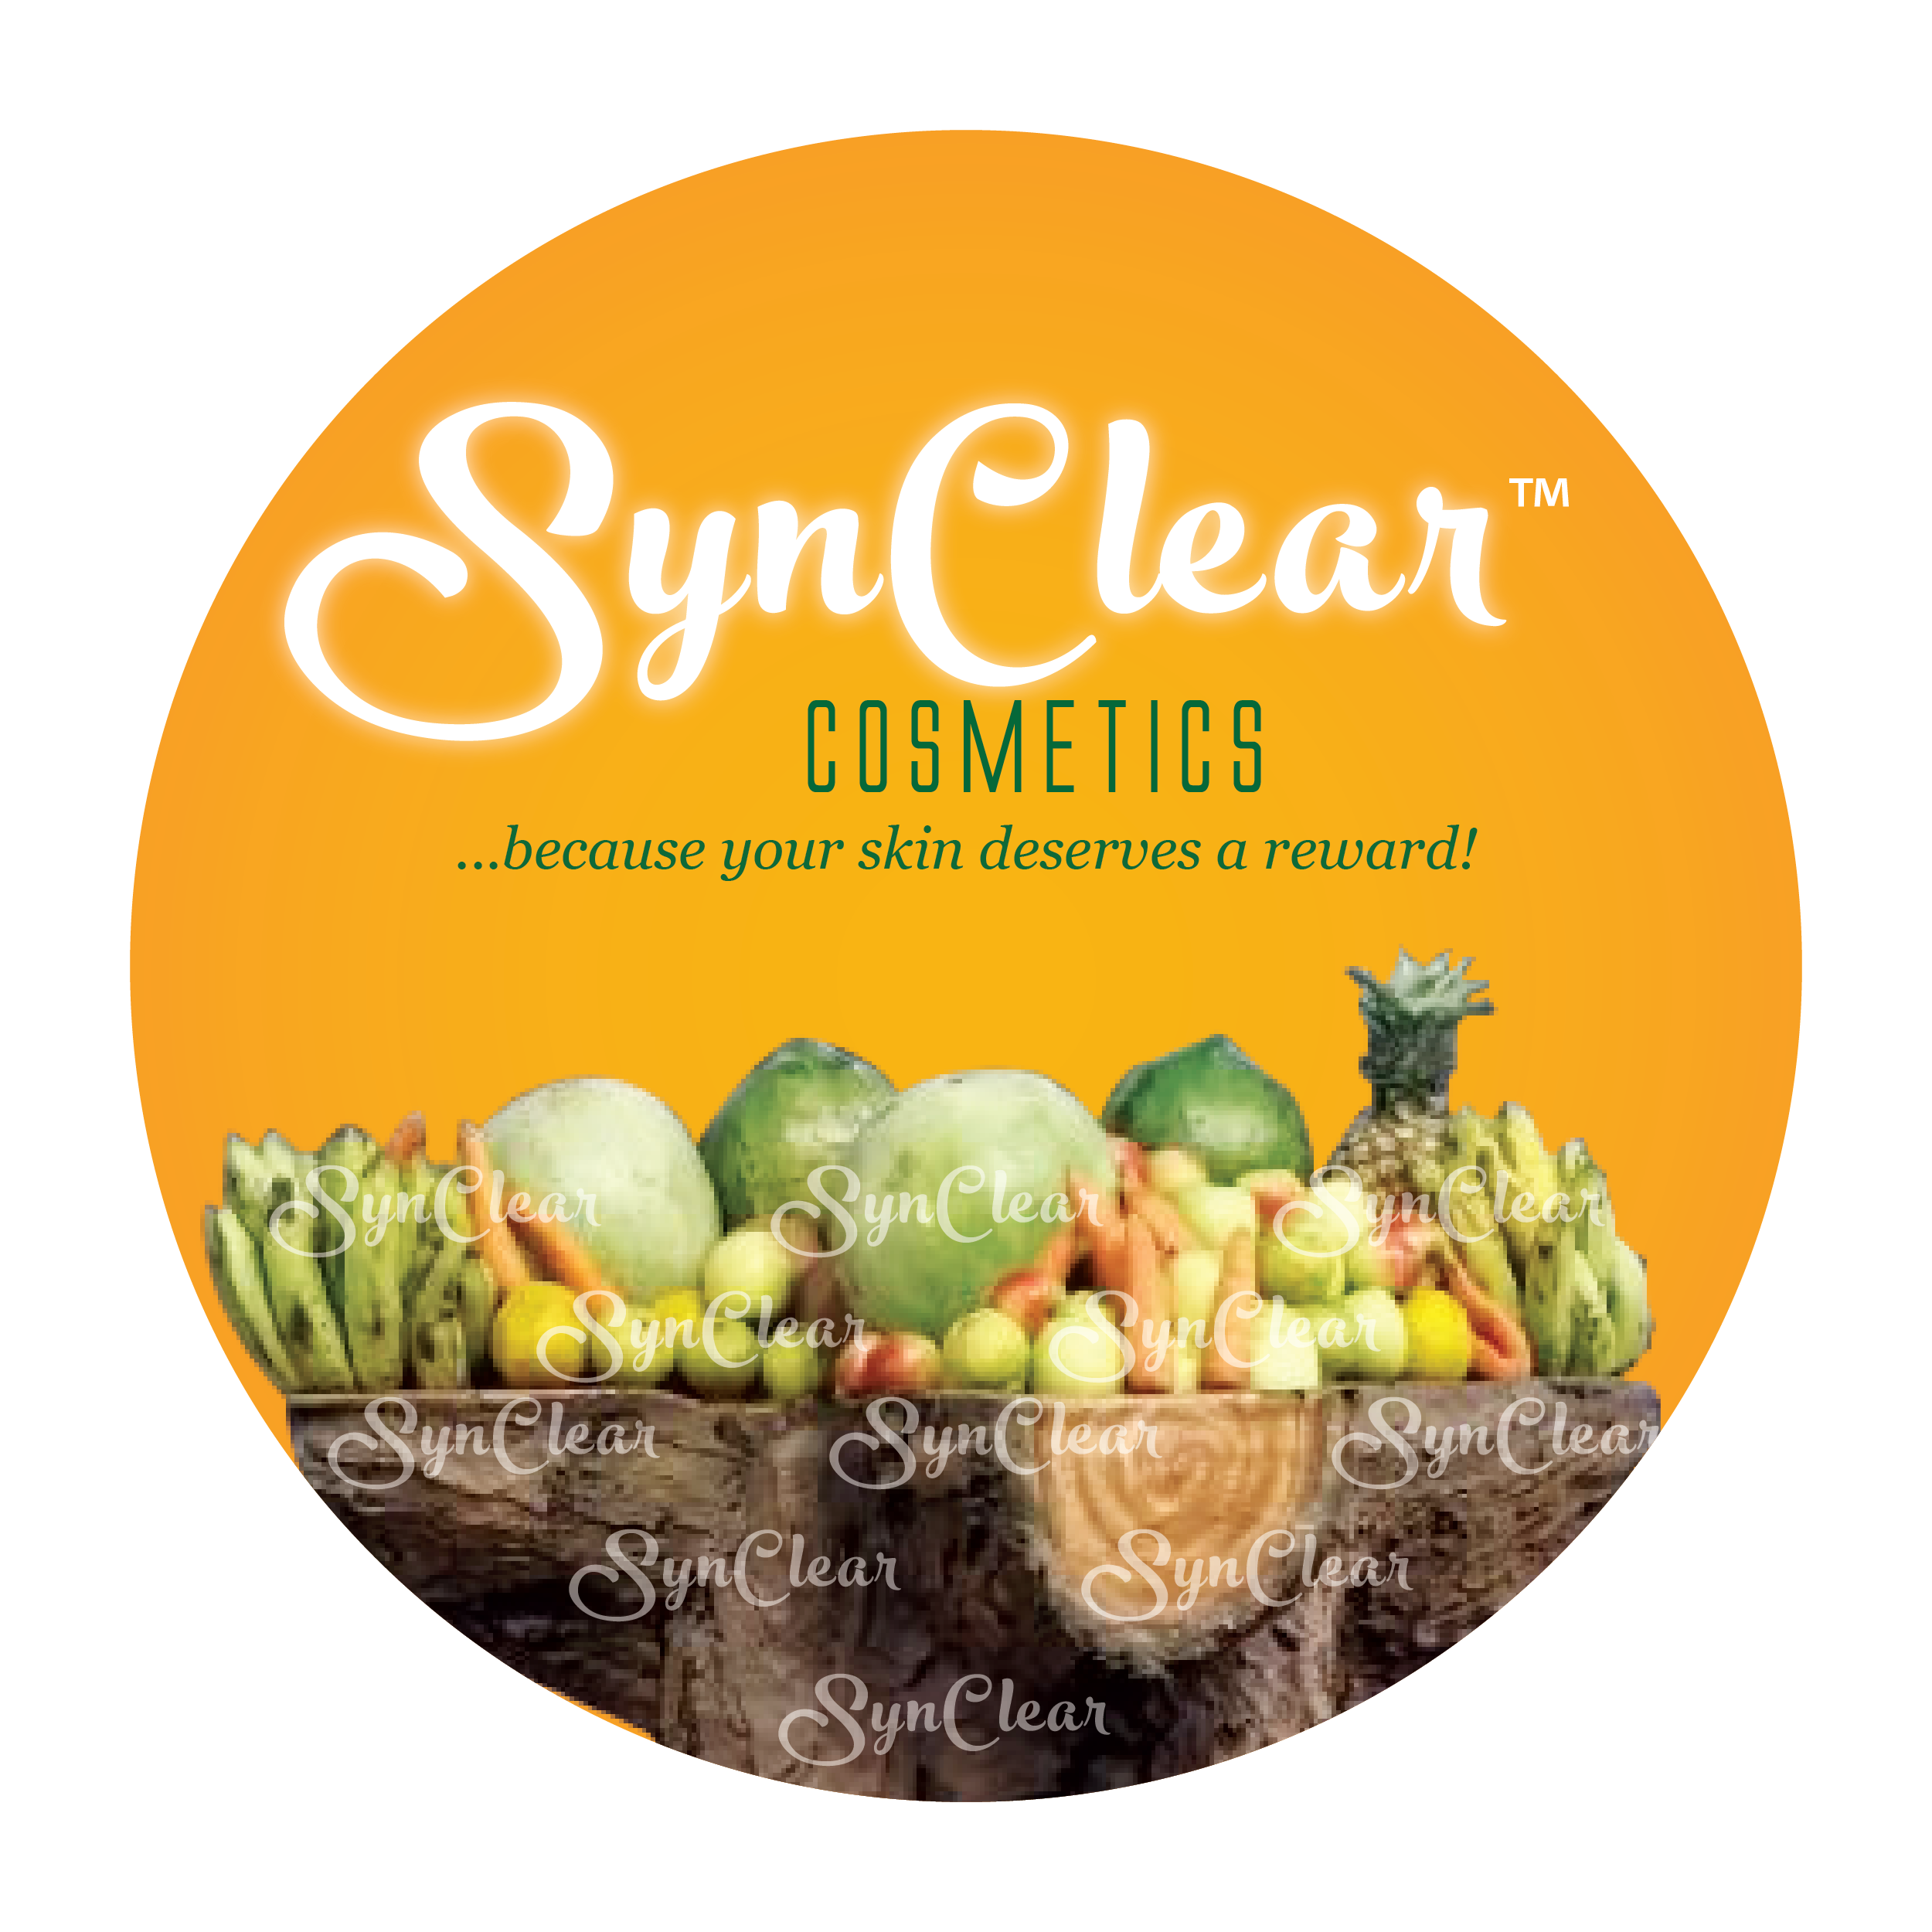 synclearcosmetics-01